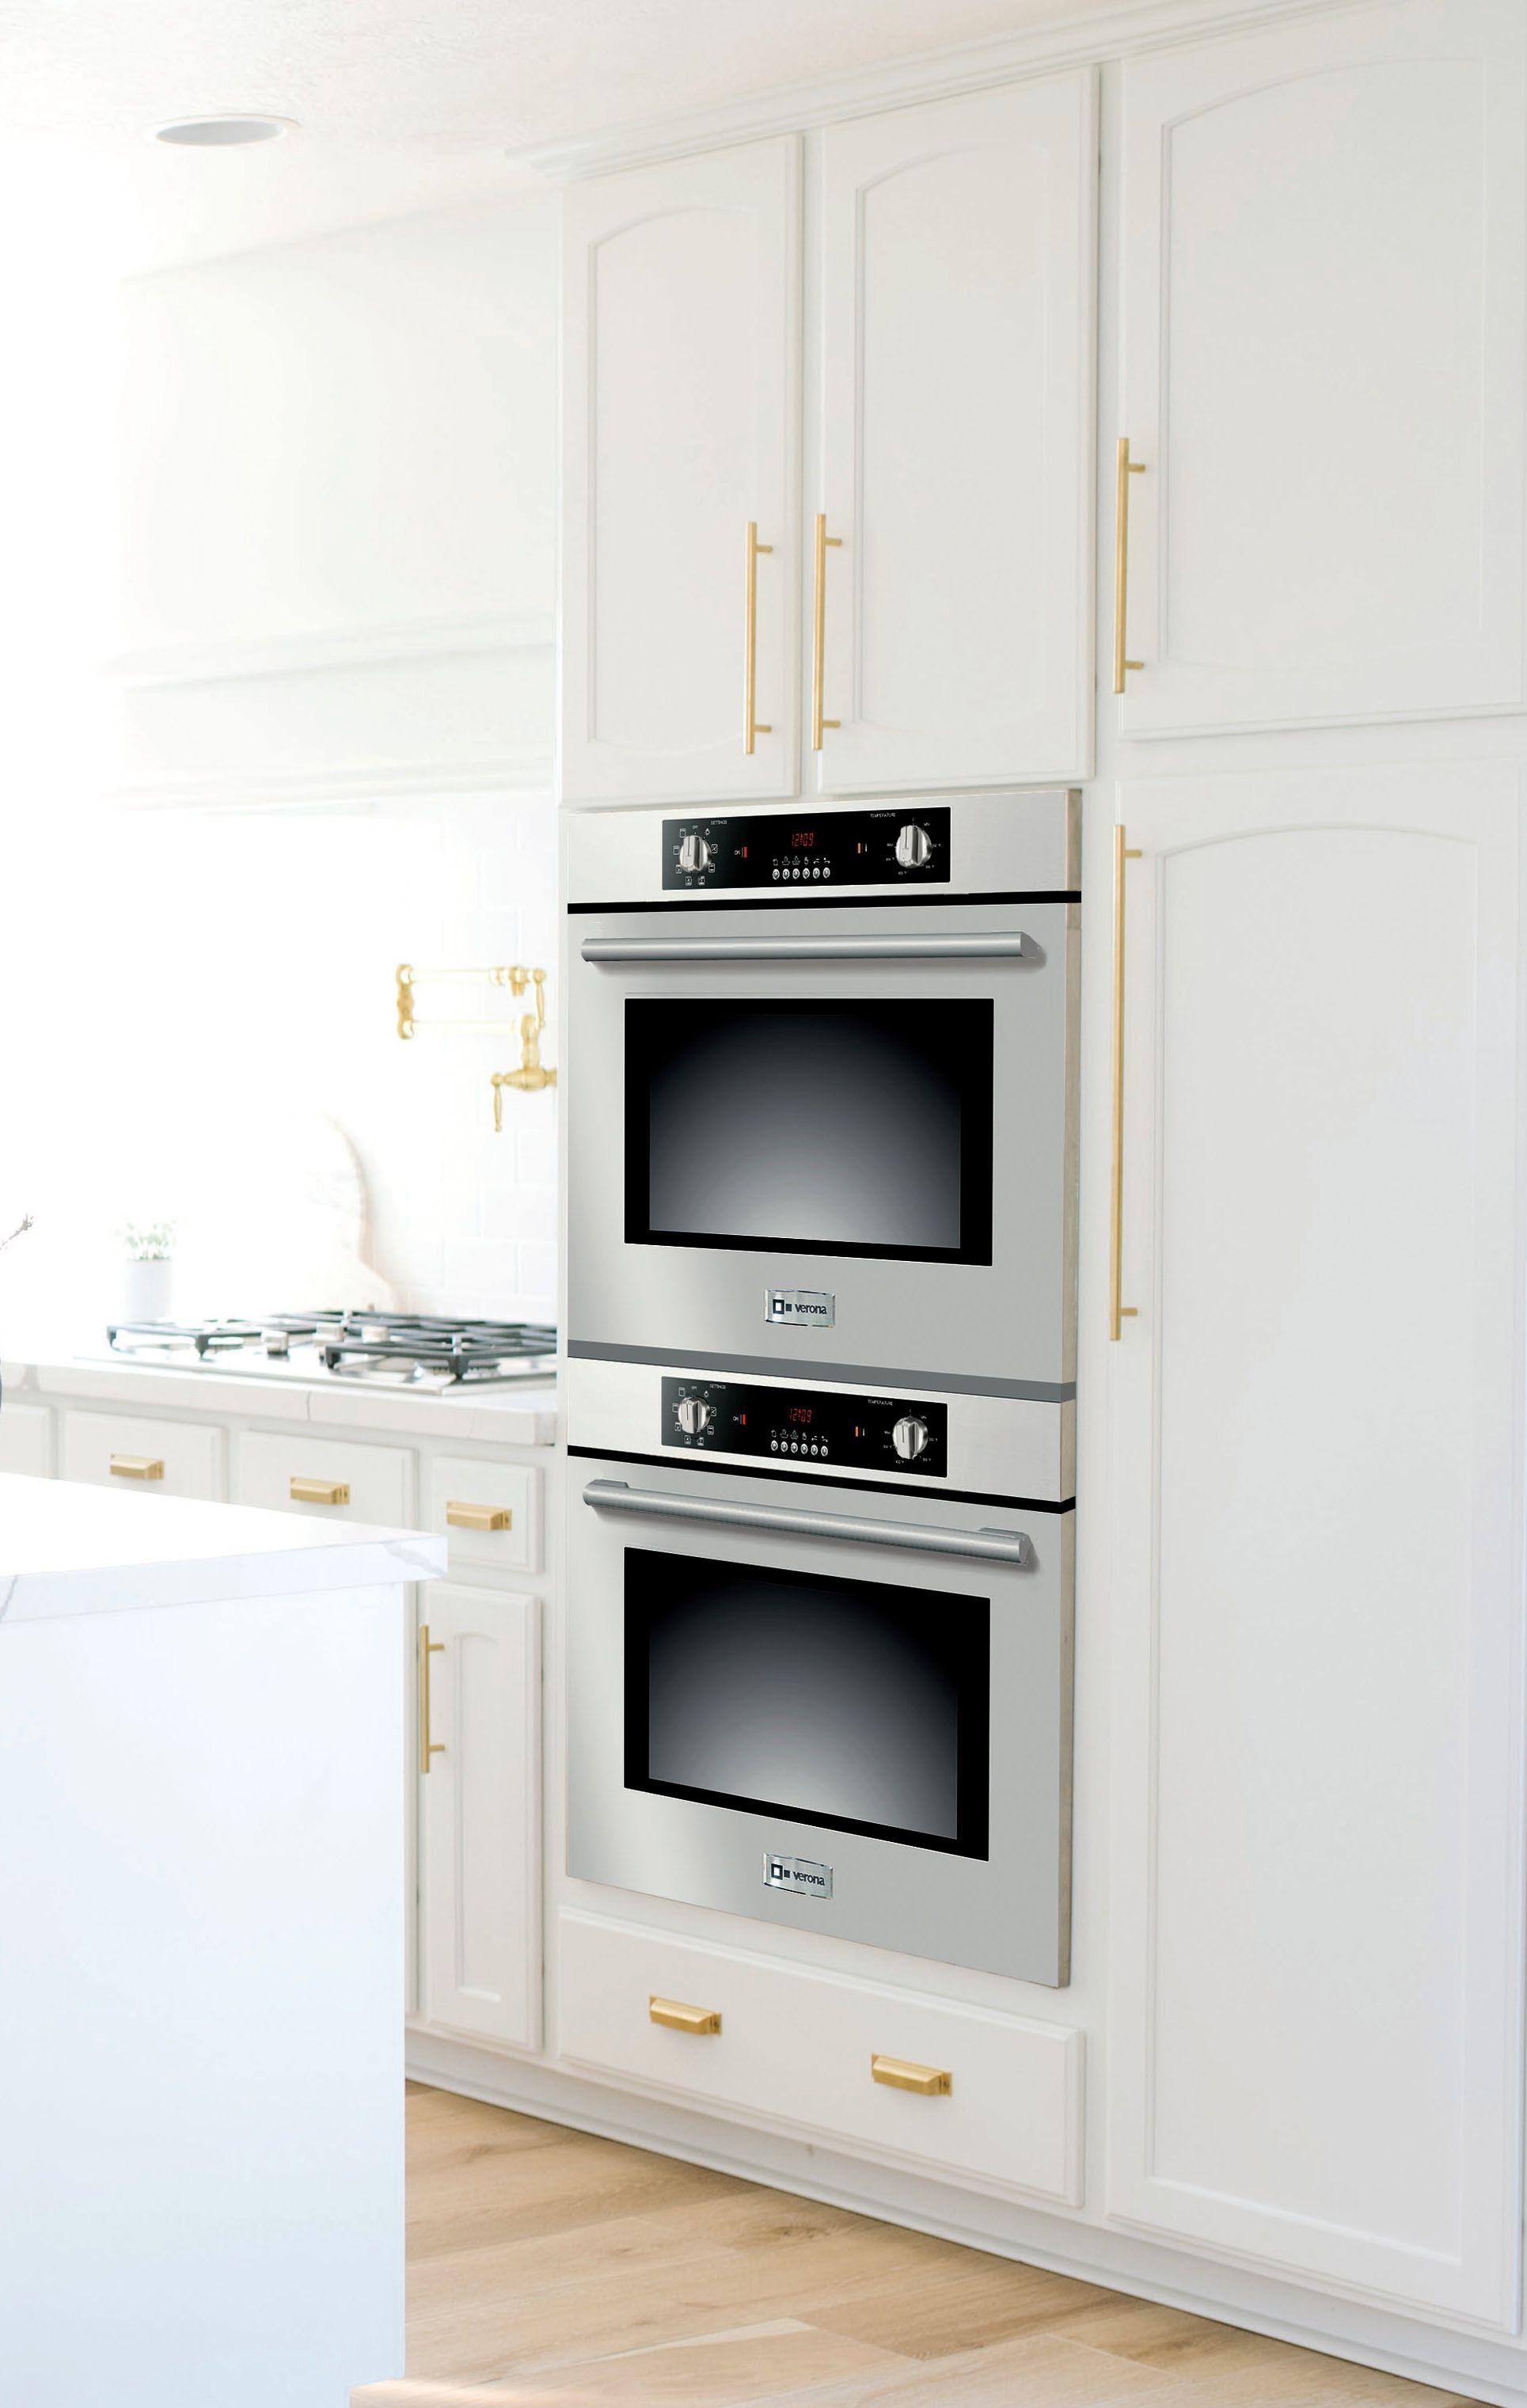 24 Inch Wall Oven & 30 Inch Wall Oven